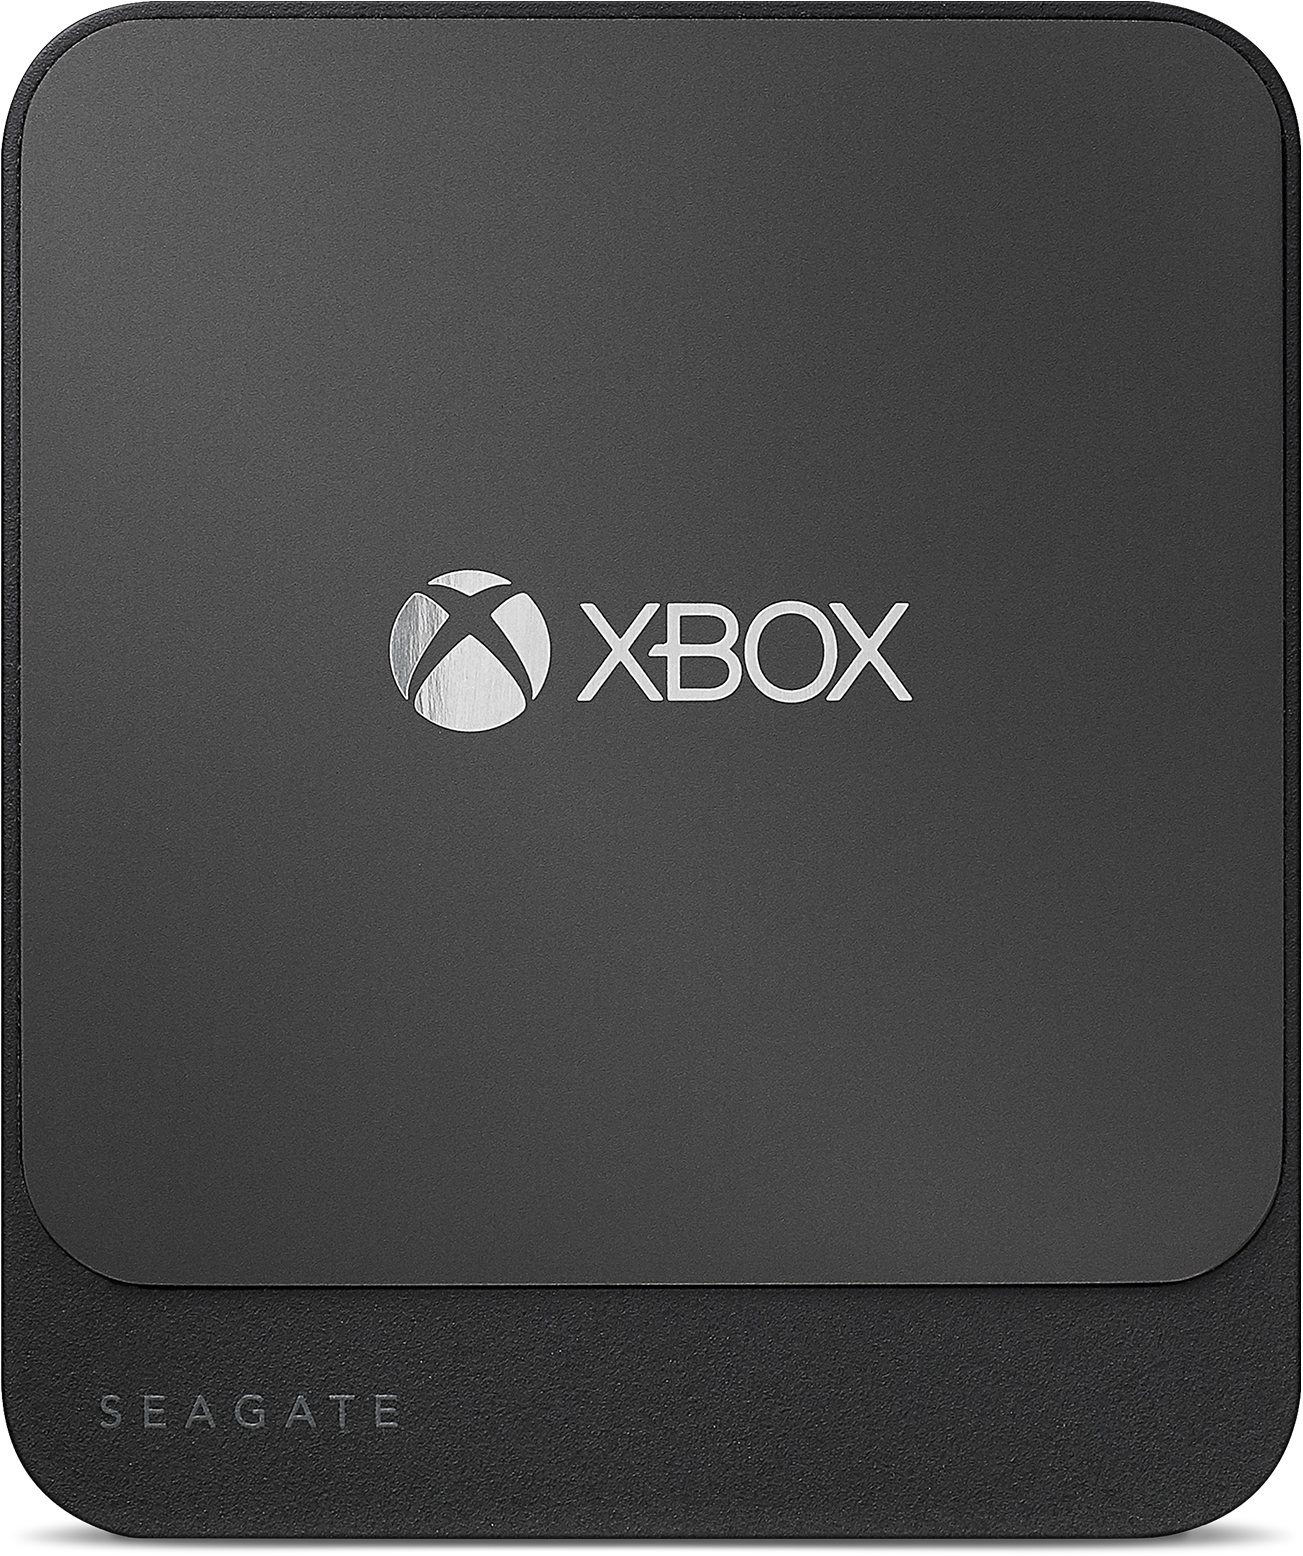 ssd card for xbox